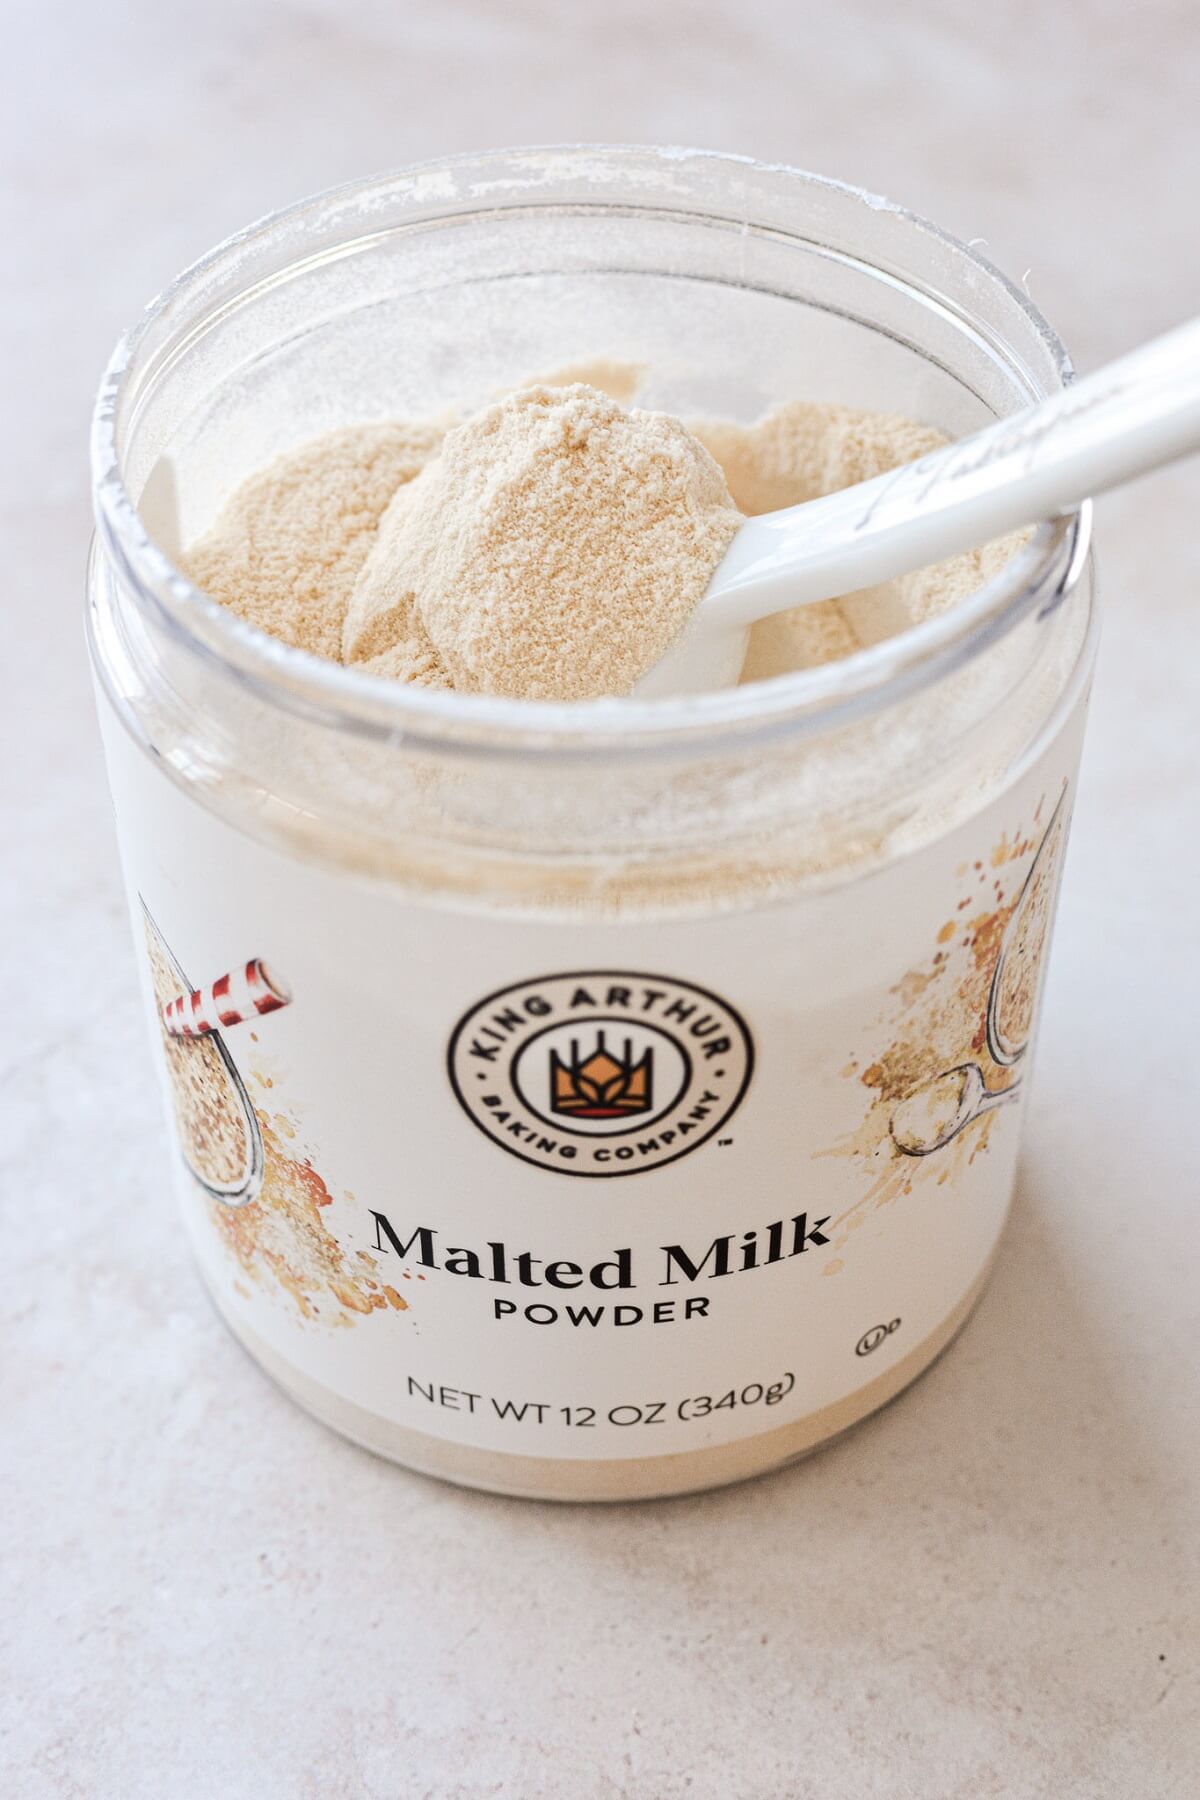 Container of malted milk powder.